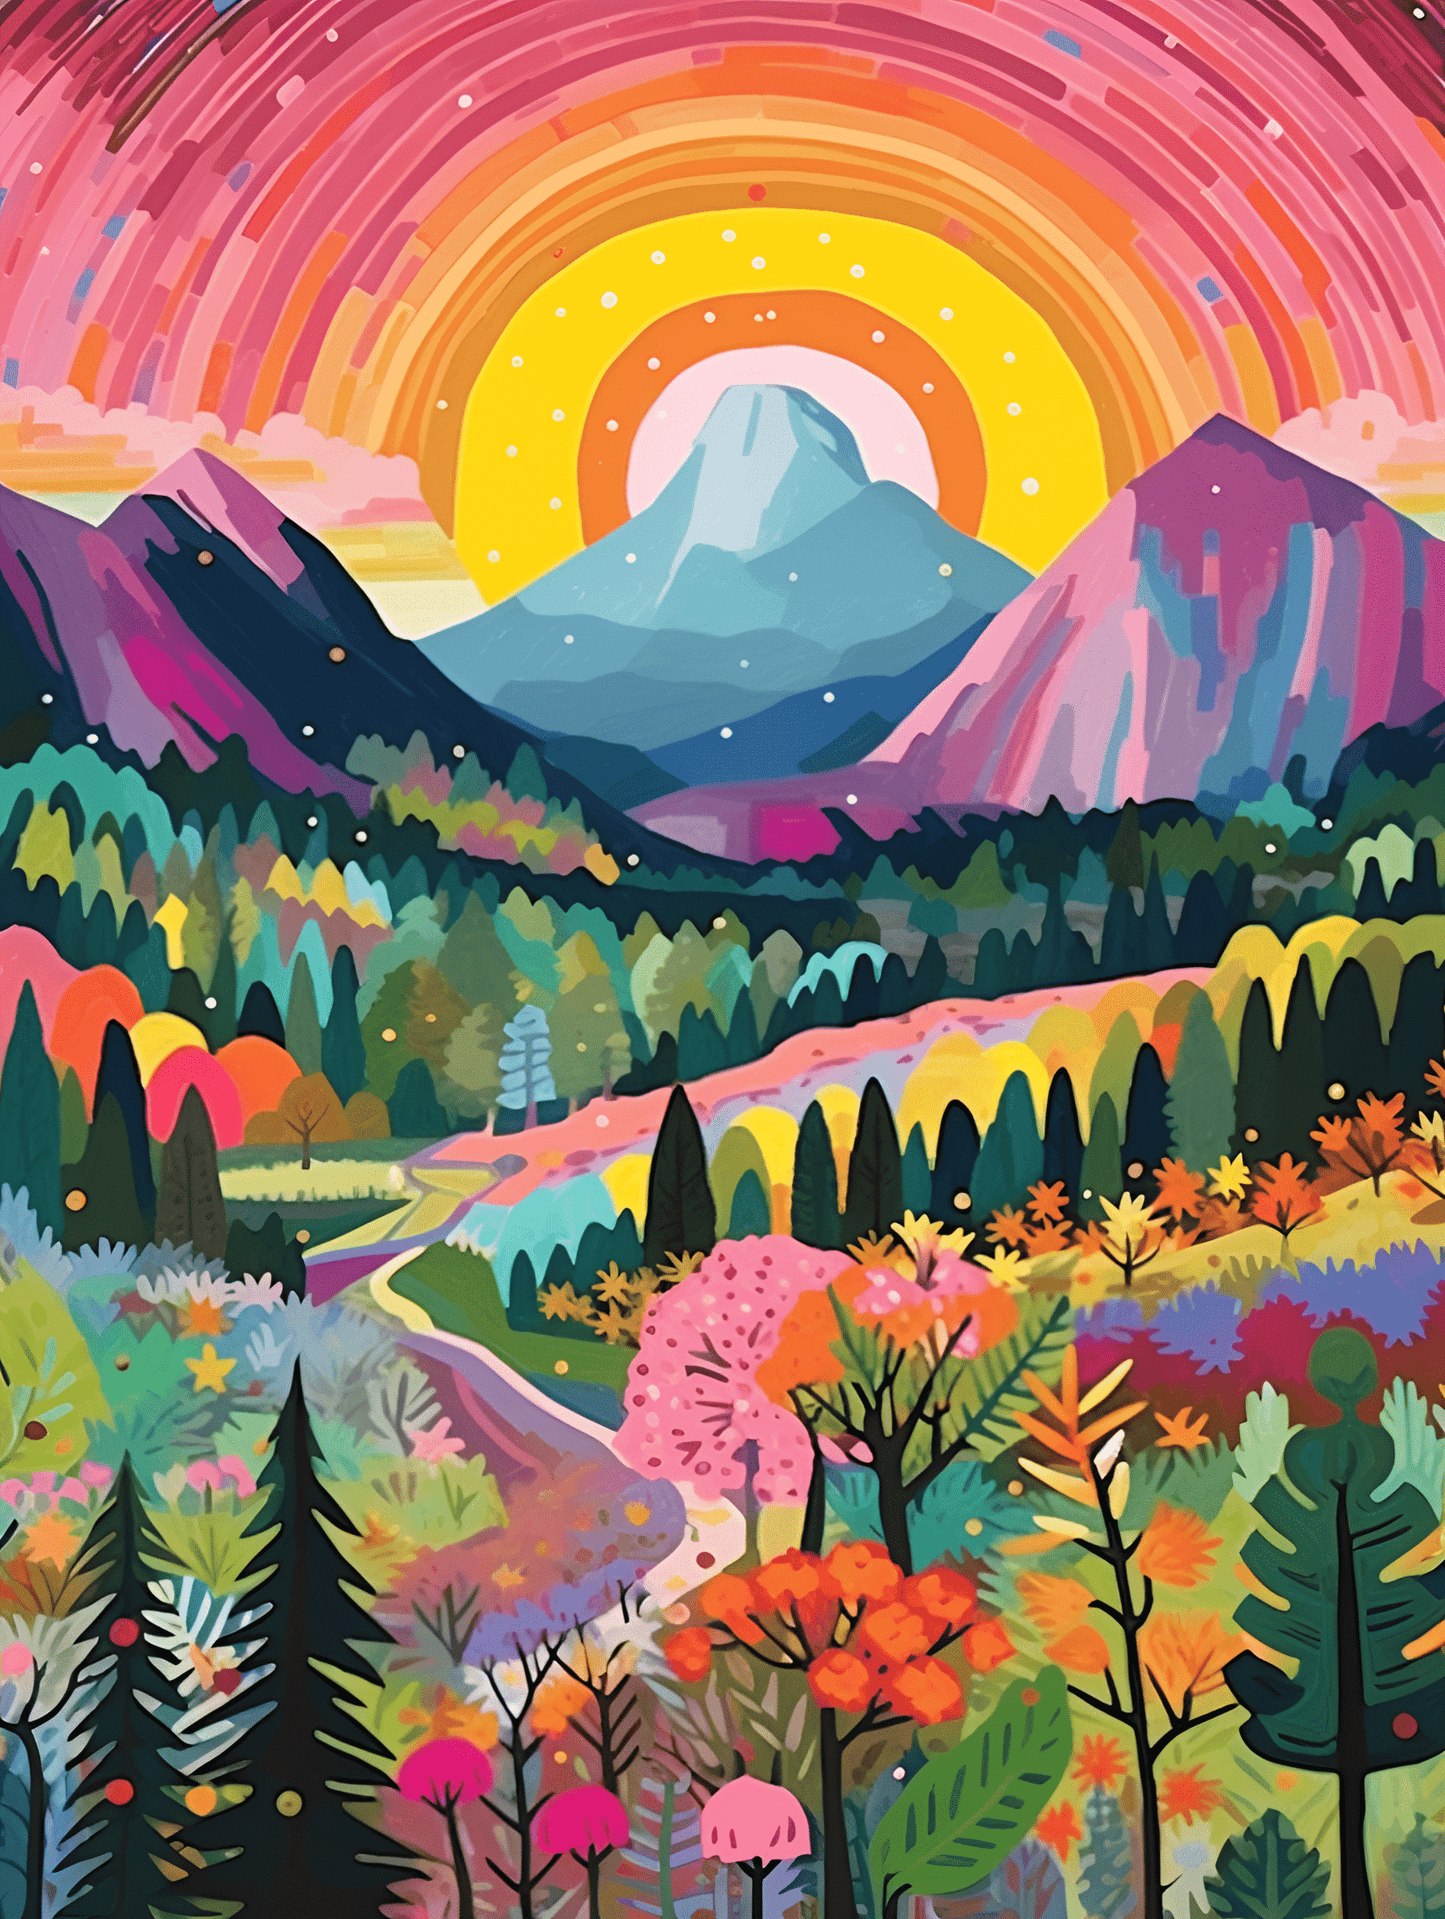 "Colorful Yosemite" Series by ColourMost™ #06 - 'Glow' | Original Paint by Numbers